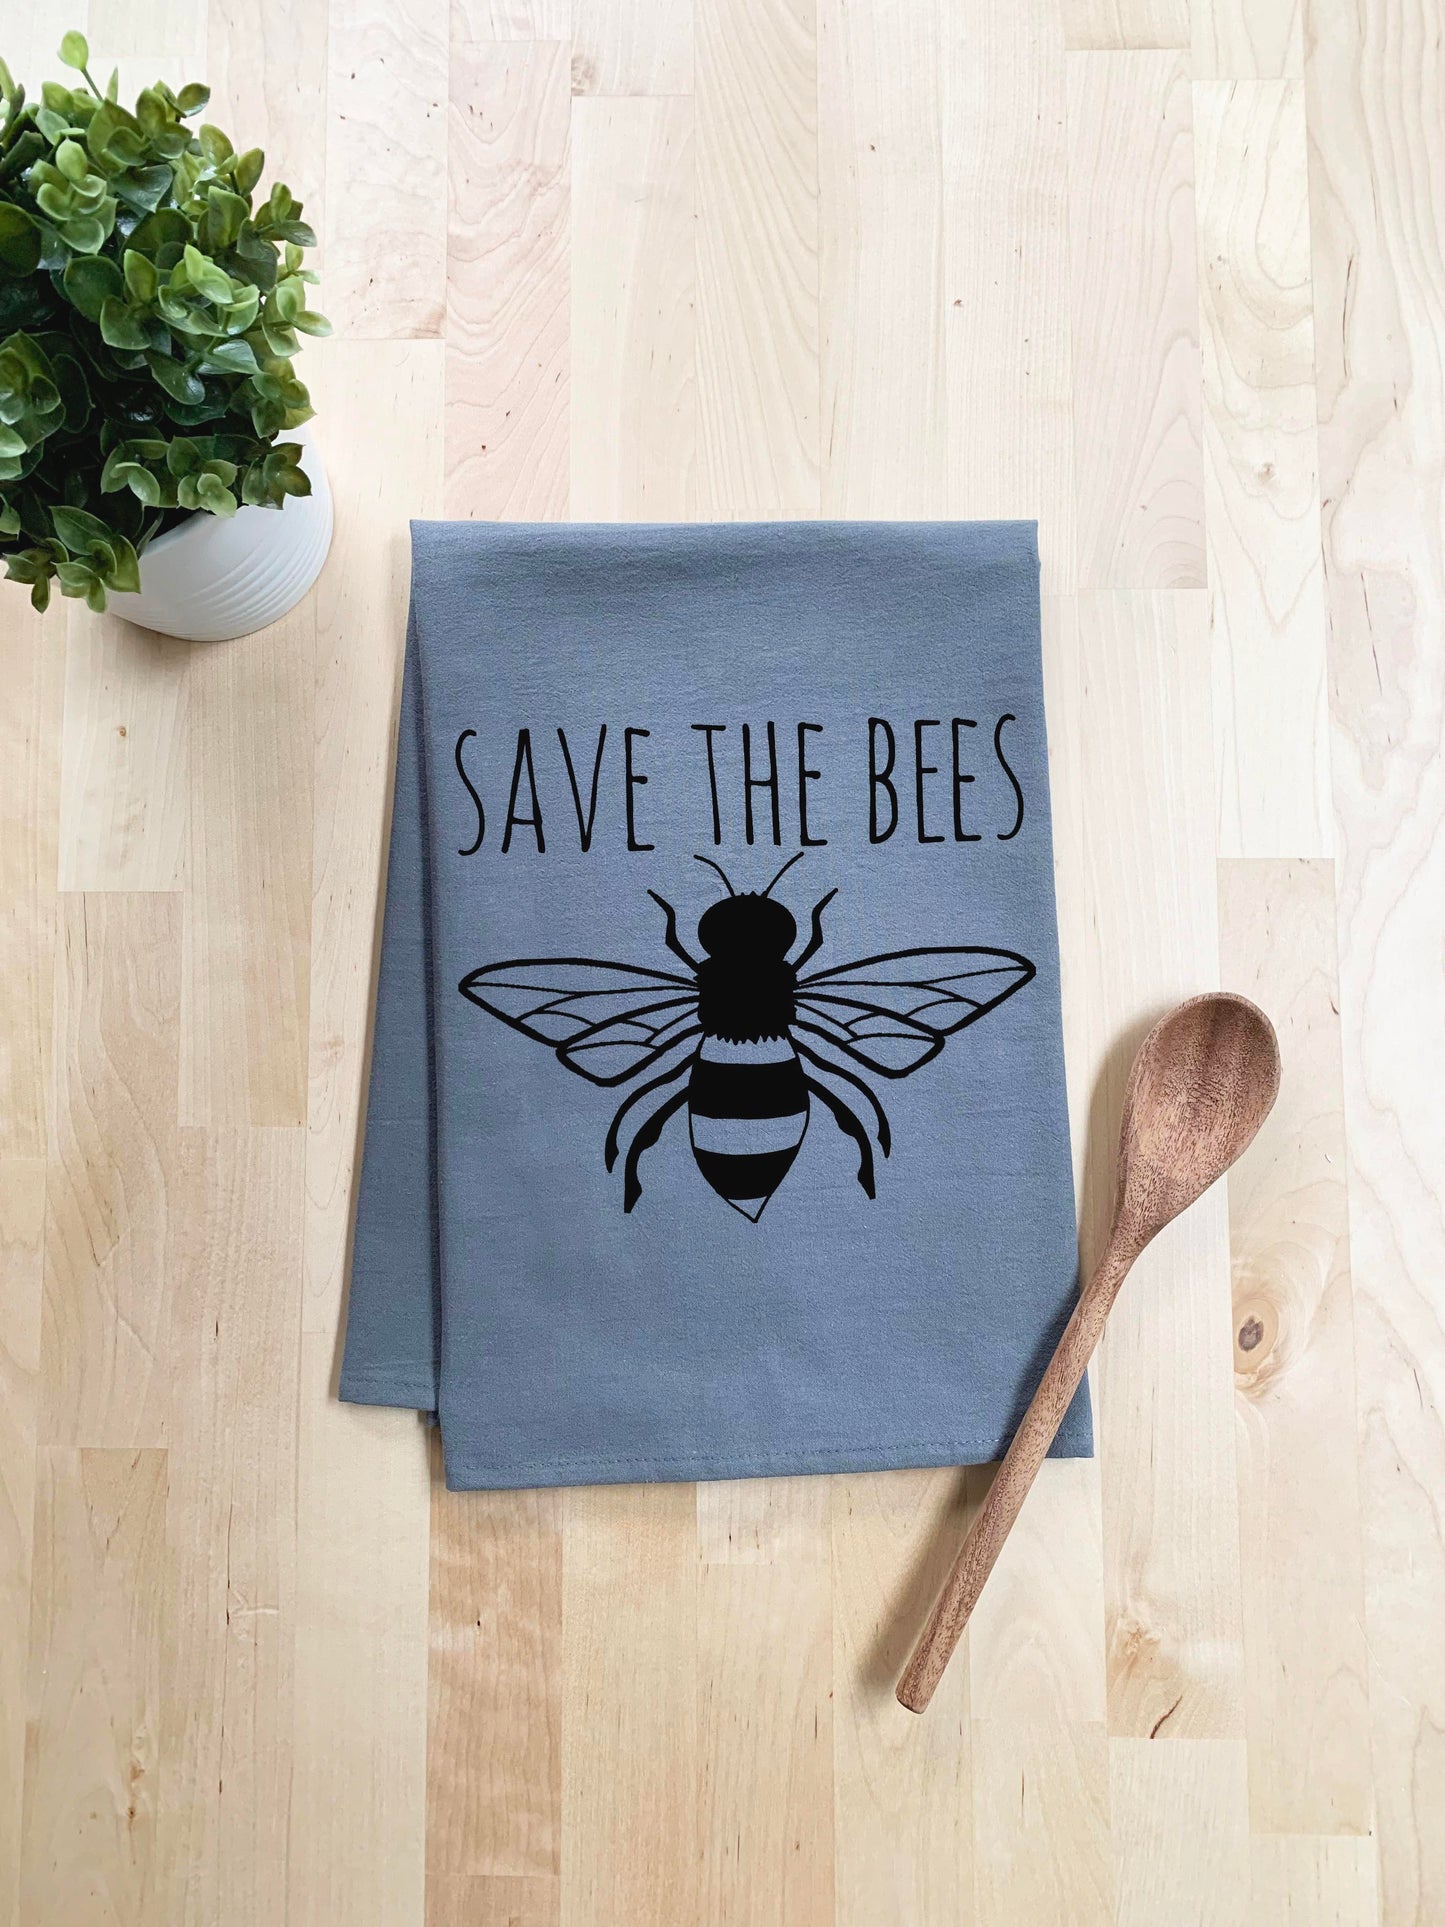 Save The Bees Dish Towel - White Or Gray - MoonlightMakers